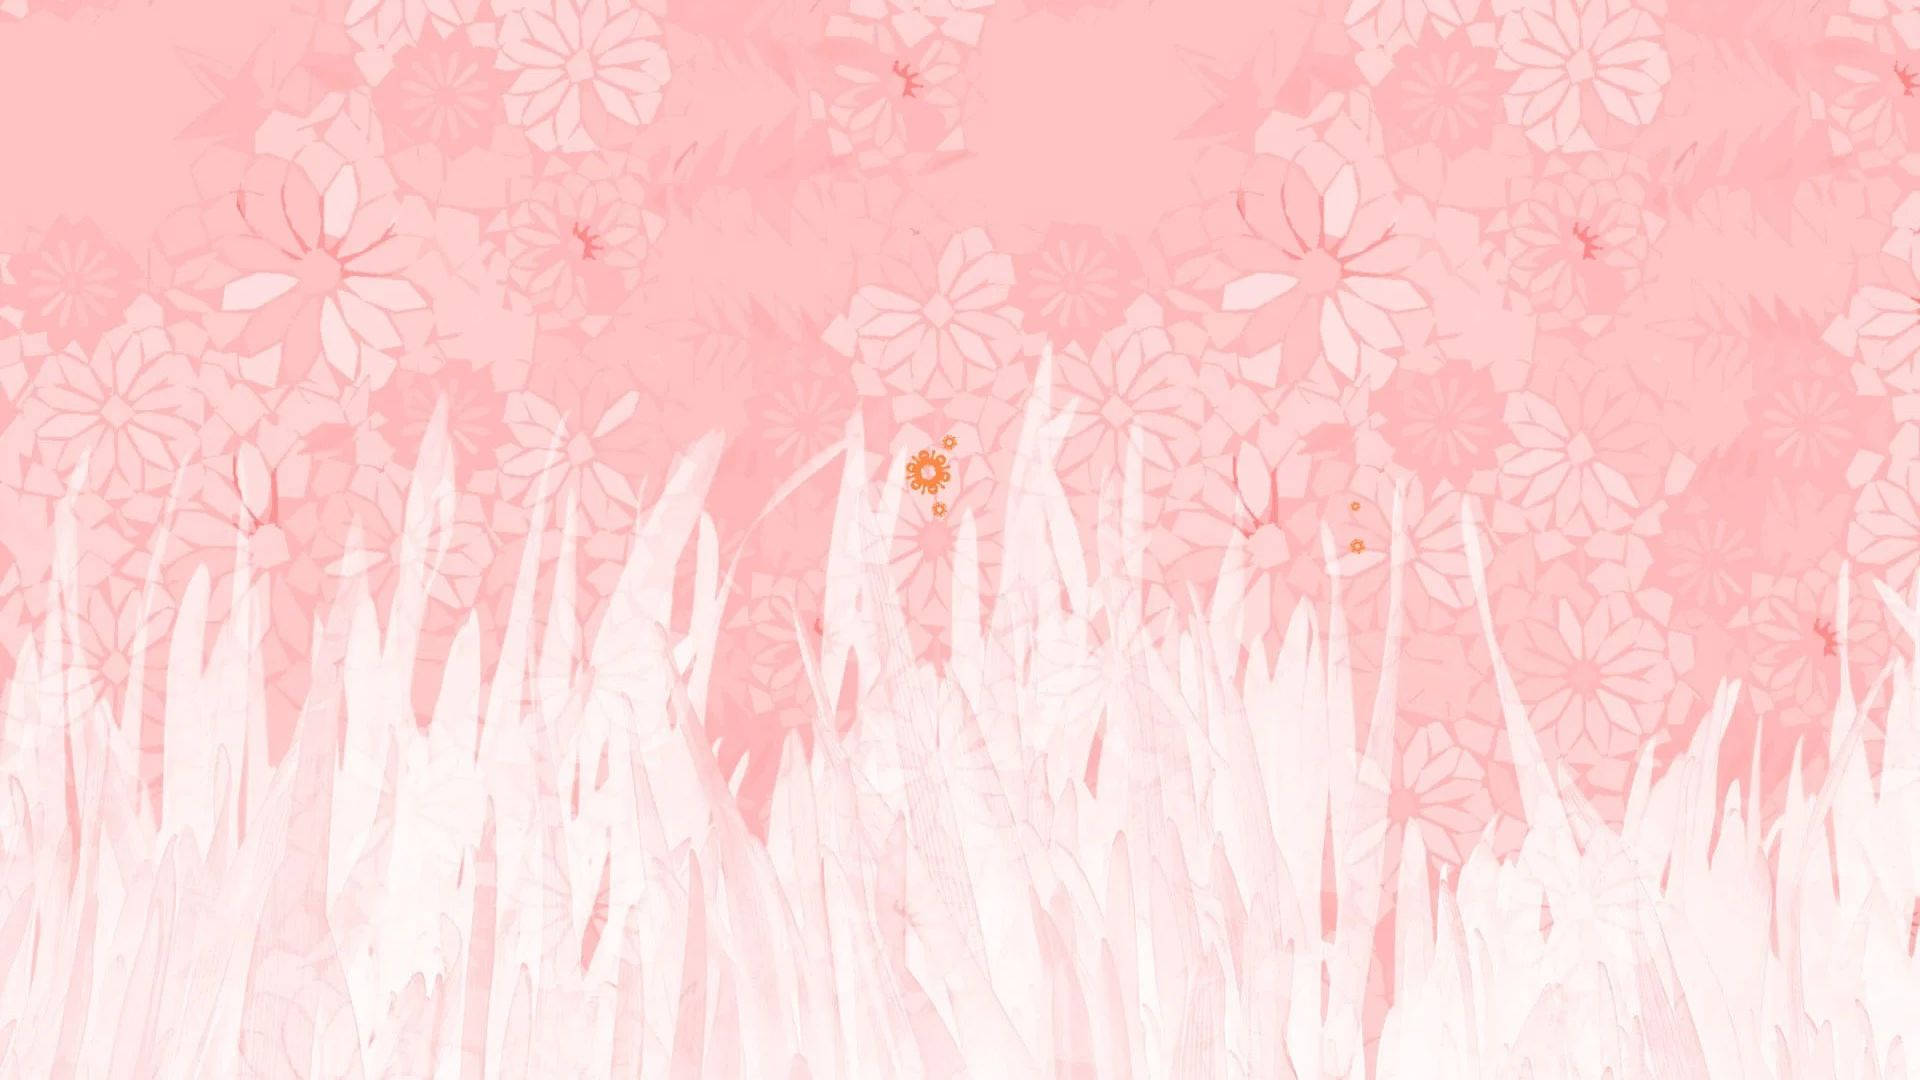 Aesthetic Pink Grass And Flowers Wallpaper